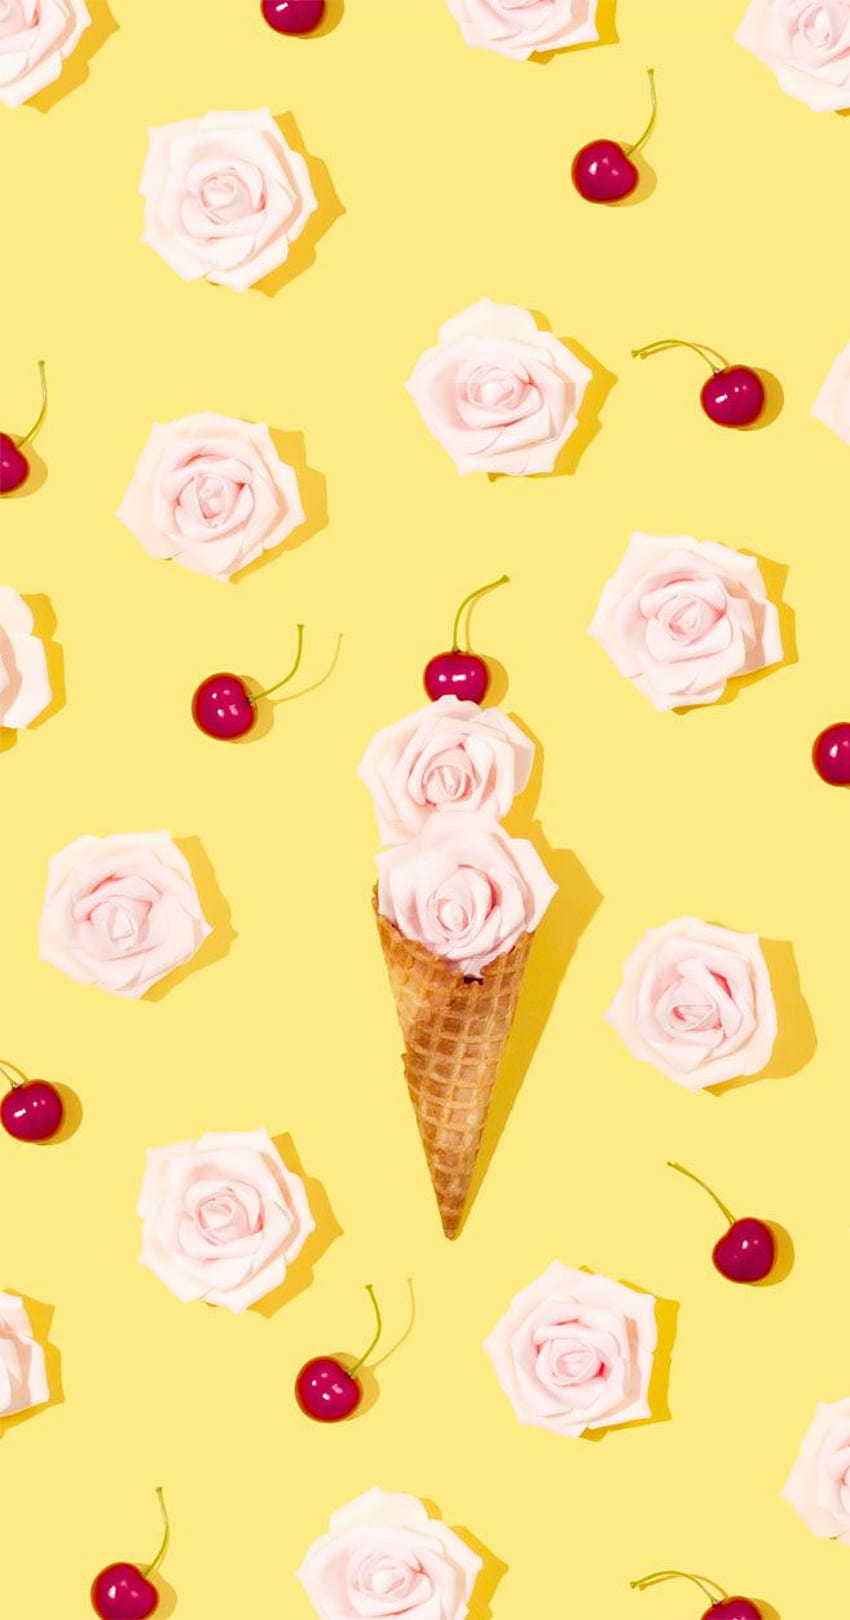 Ice cream cone and roses with cheerful yellow backgrounds, cream summer HD phone wallpaper